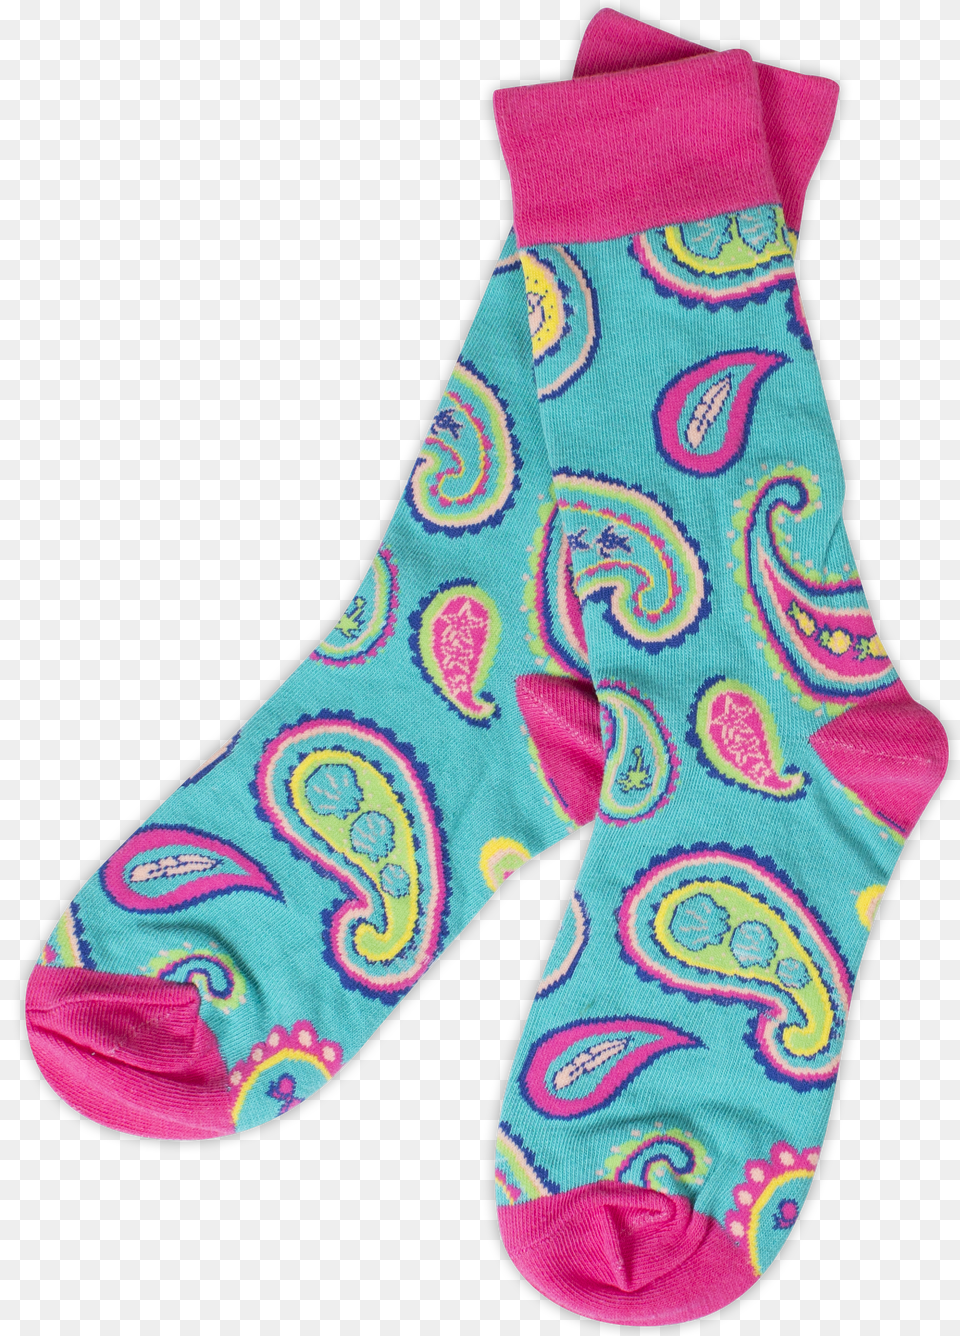 Simply Paisley Socks Palmetto Moon Free Png Download